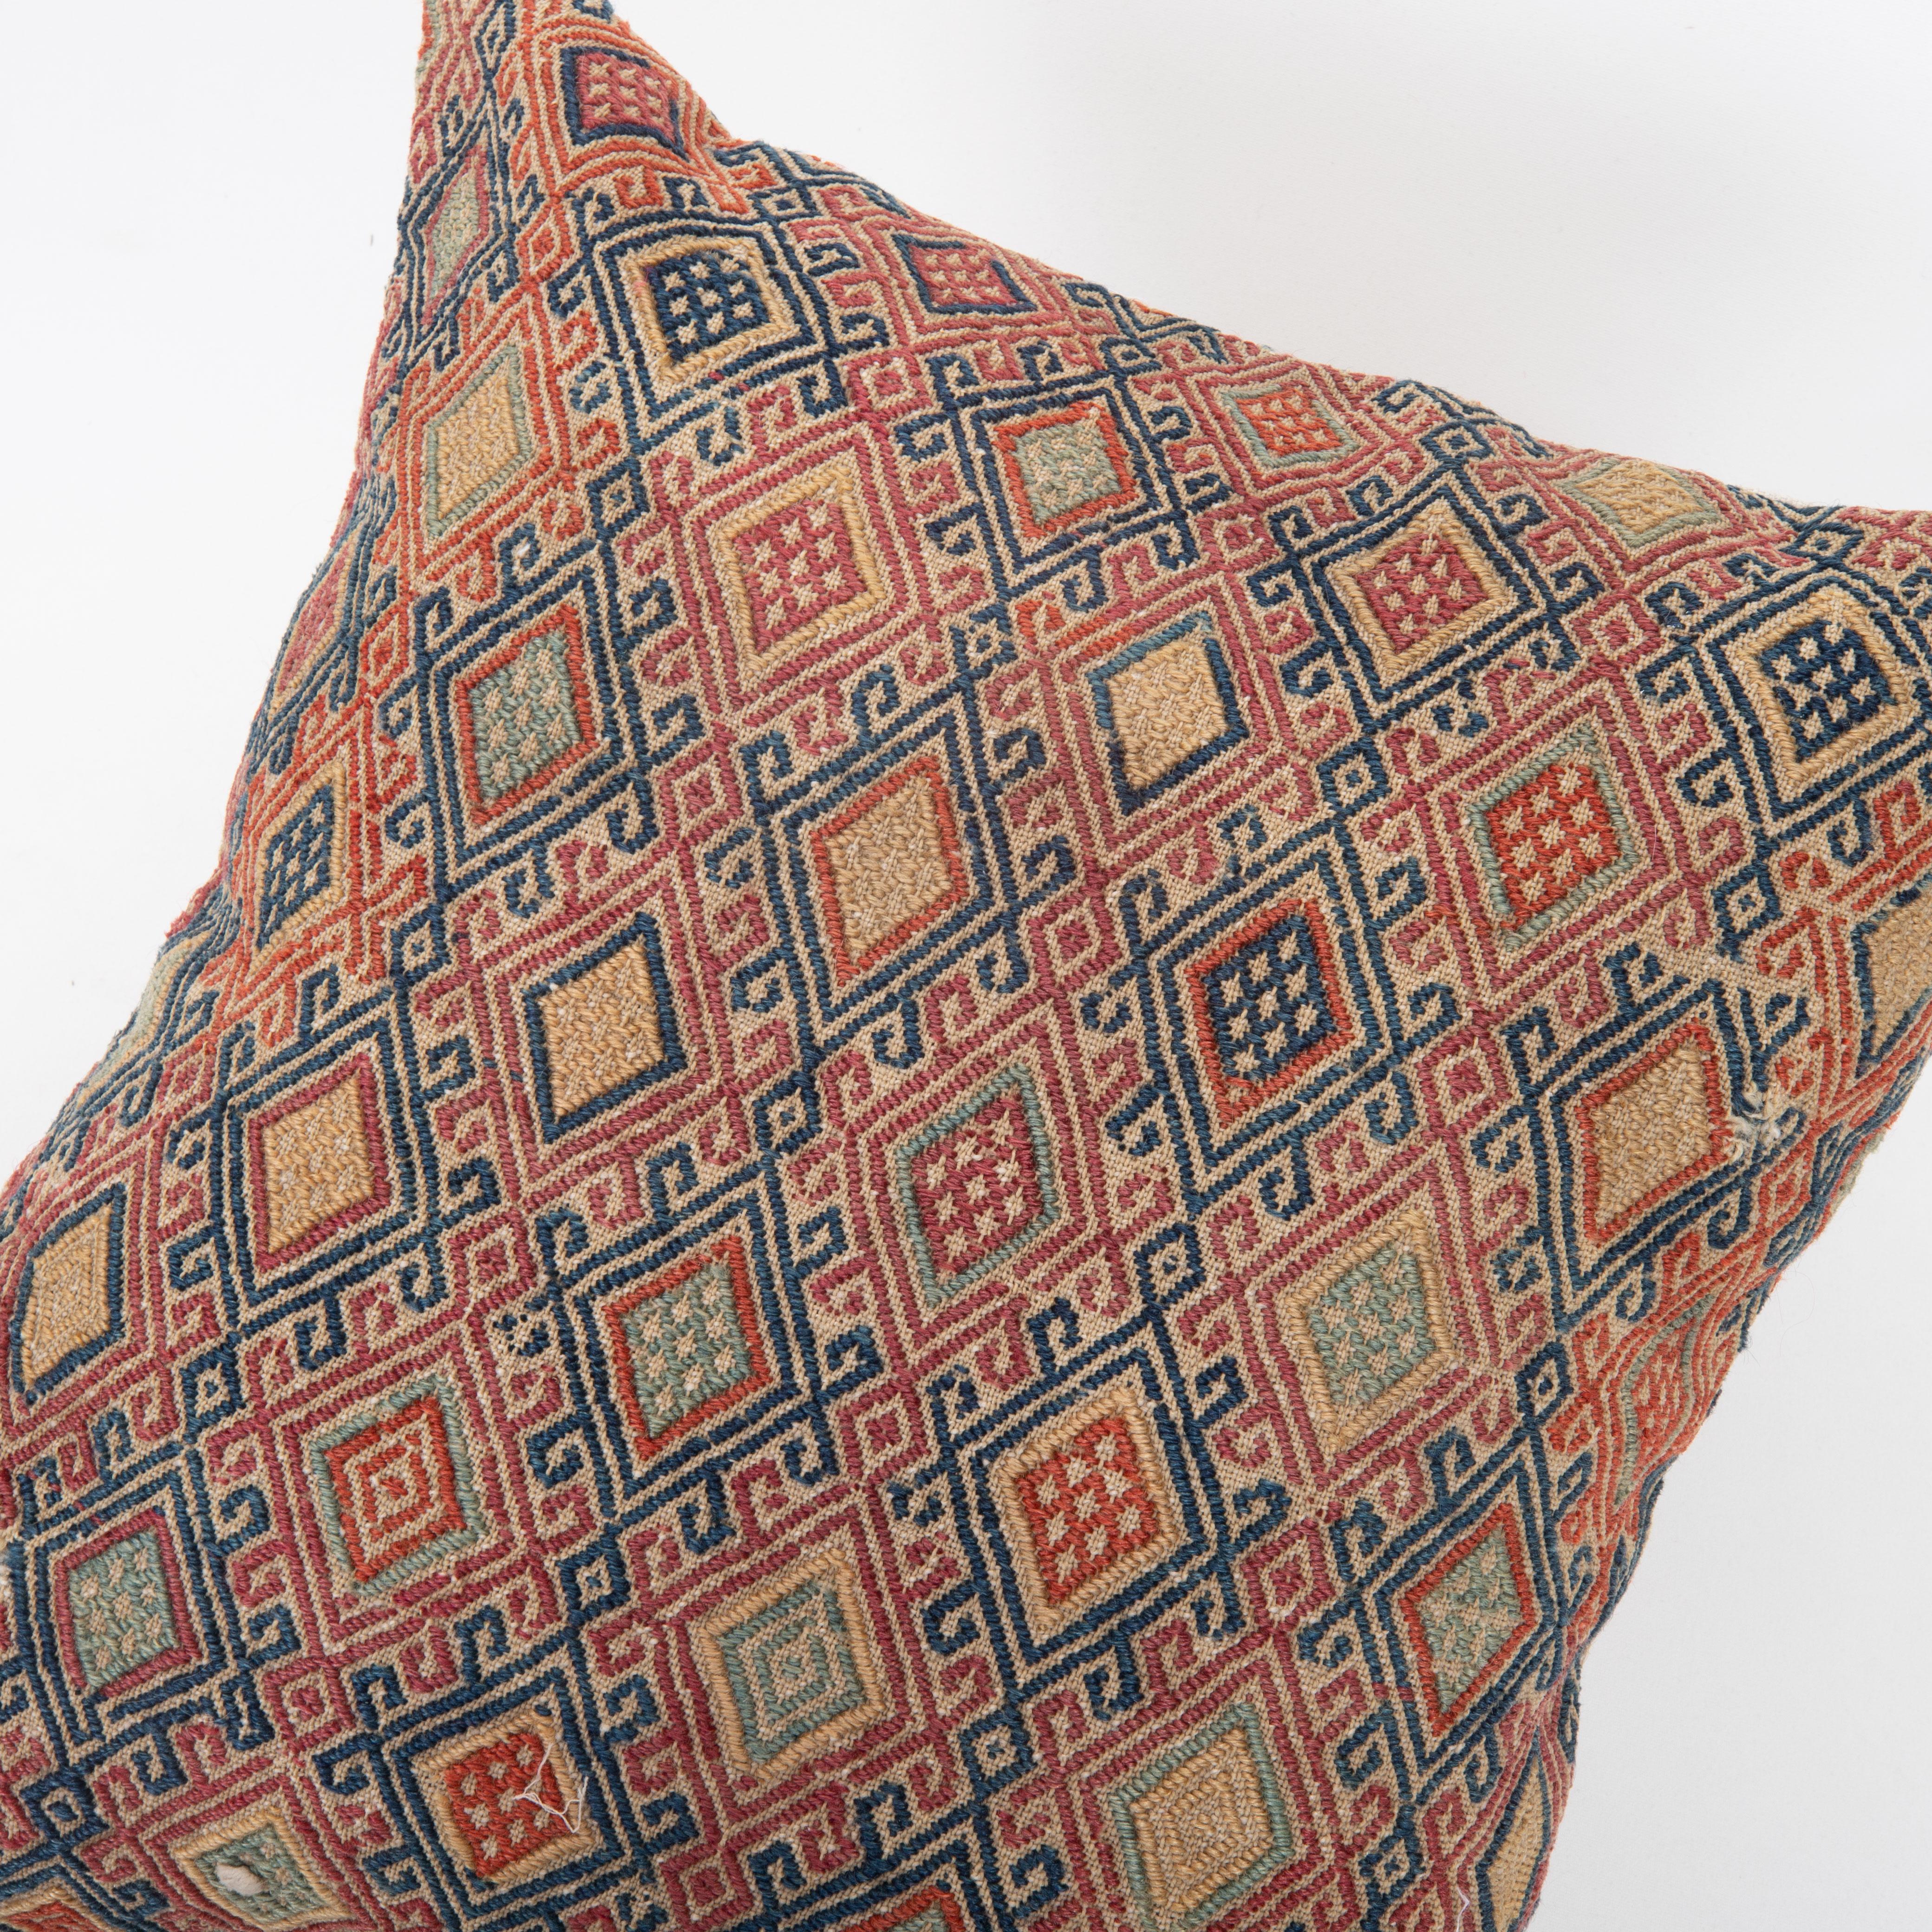 Hand-Woven Pillow Cover Fashioned from an Antique Anatolian Cicim Bag Face